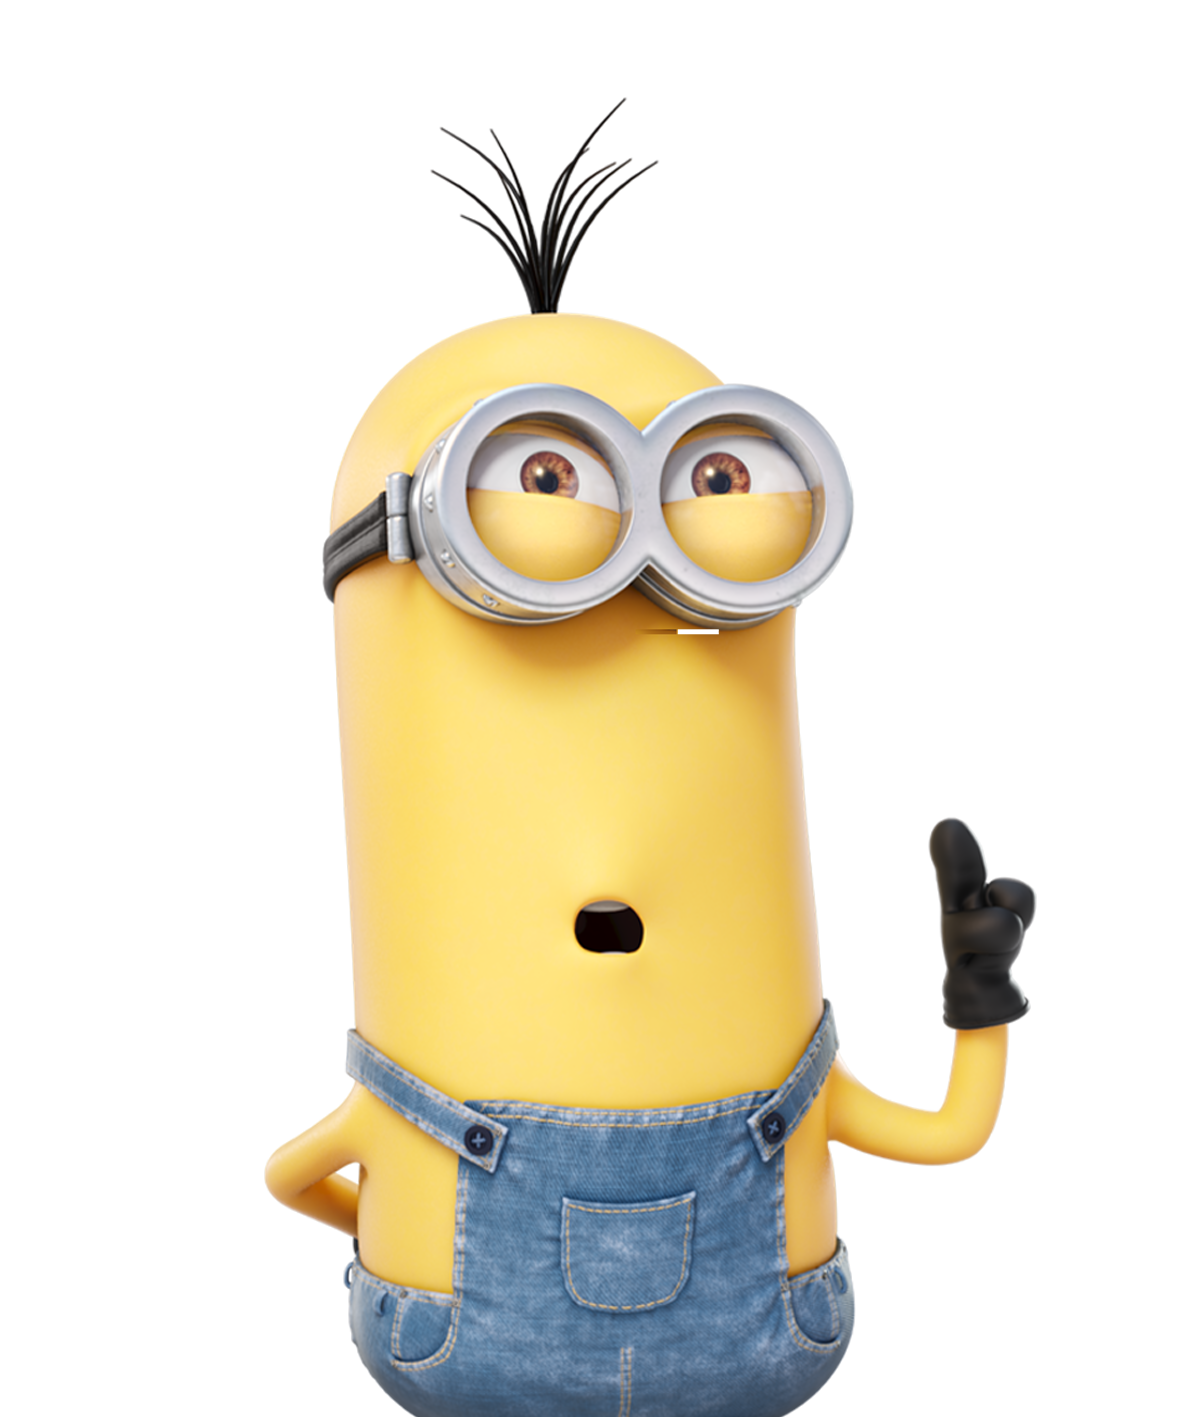 Picture of Kevin the minion from illumination entertainment